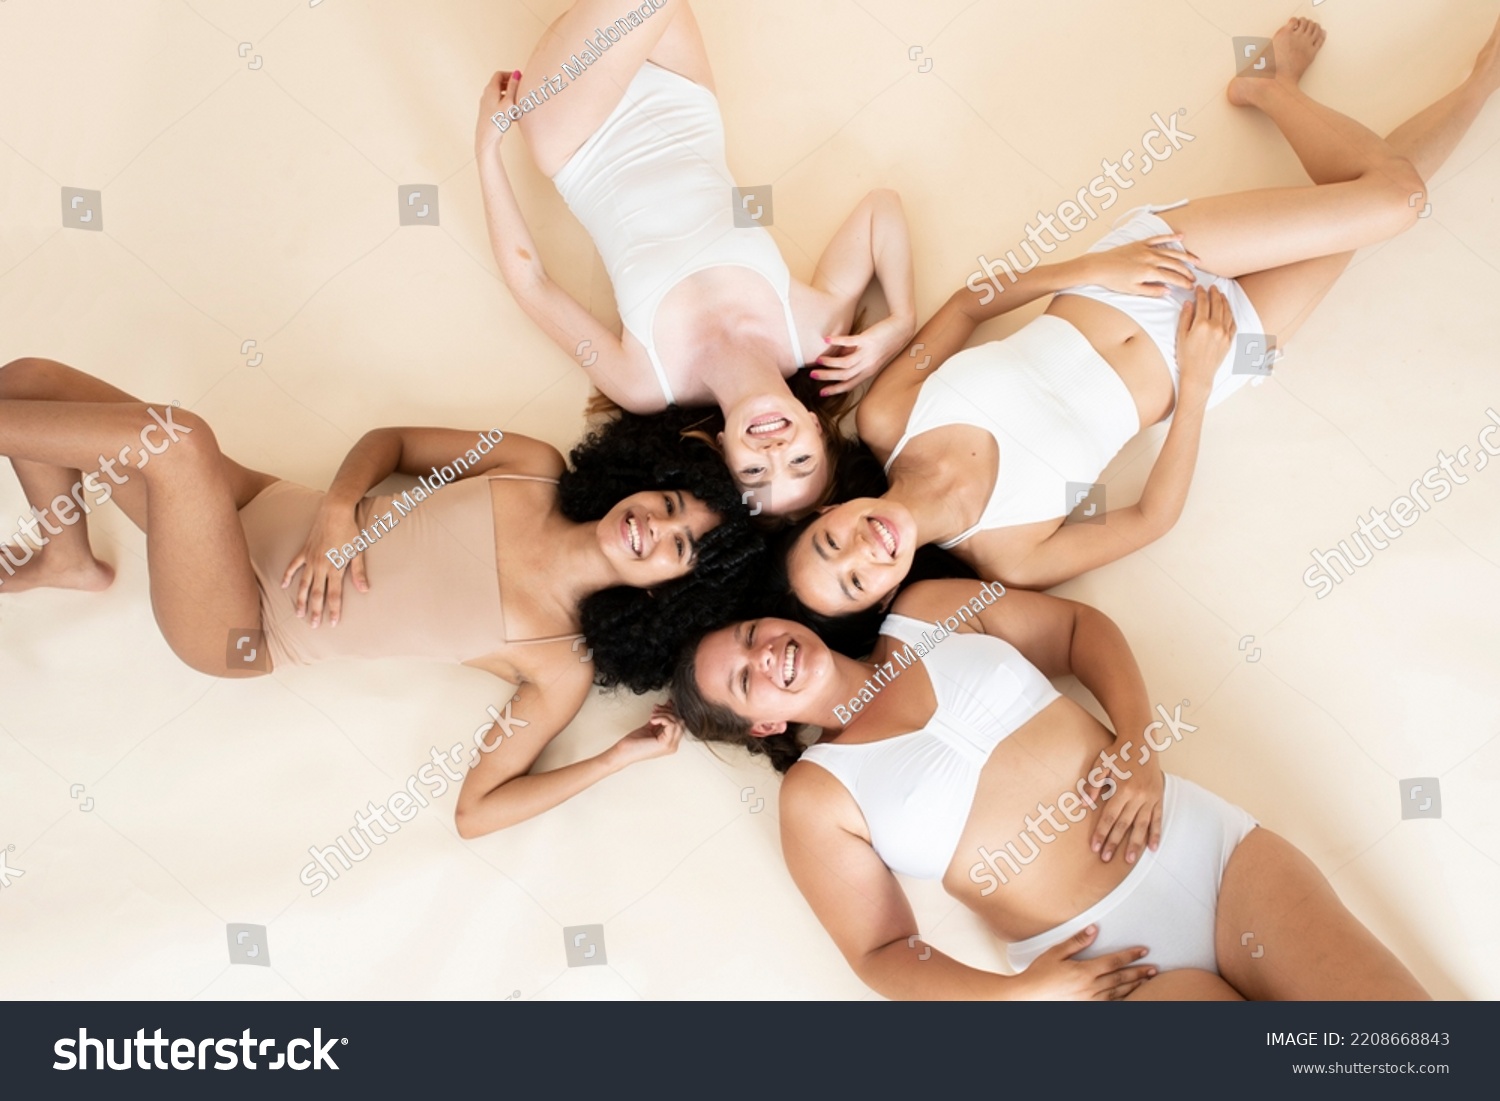 group of young girls of different sizes and races. Smiling together. Beautiful bodies. Natural beauty. Self-love. #2208668843